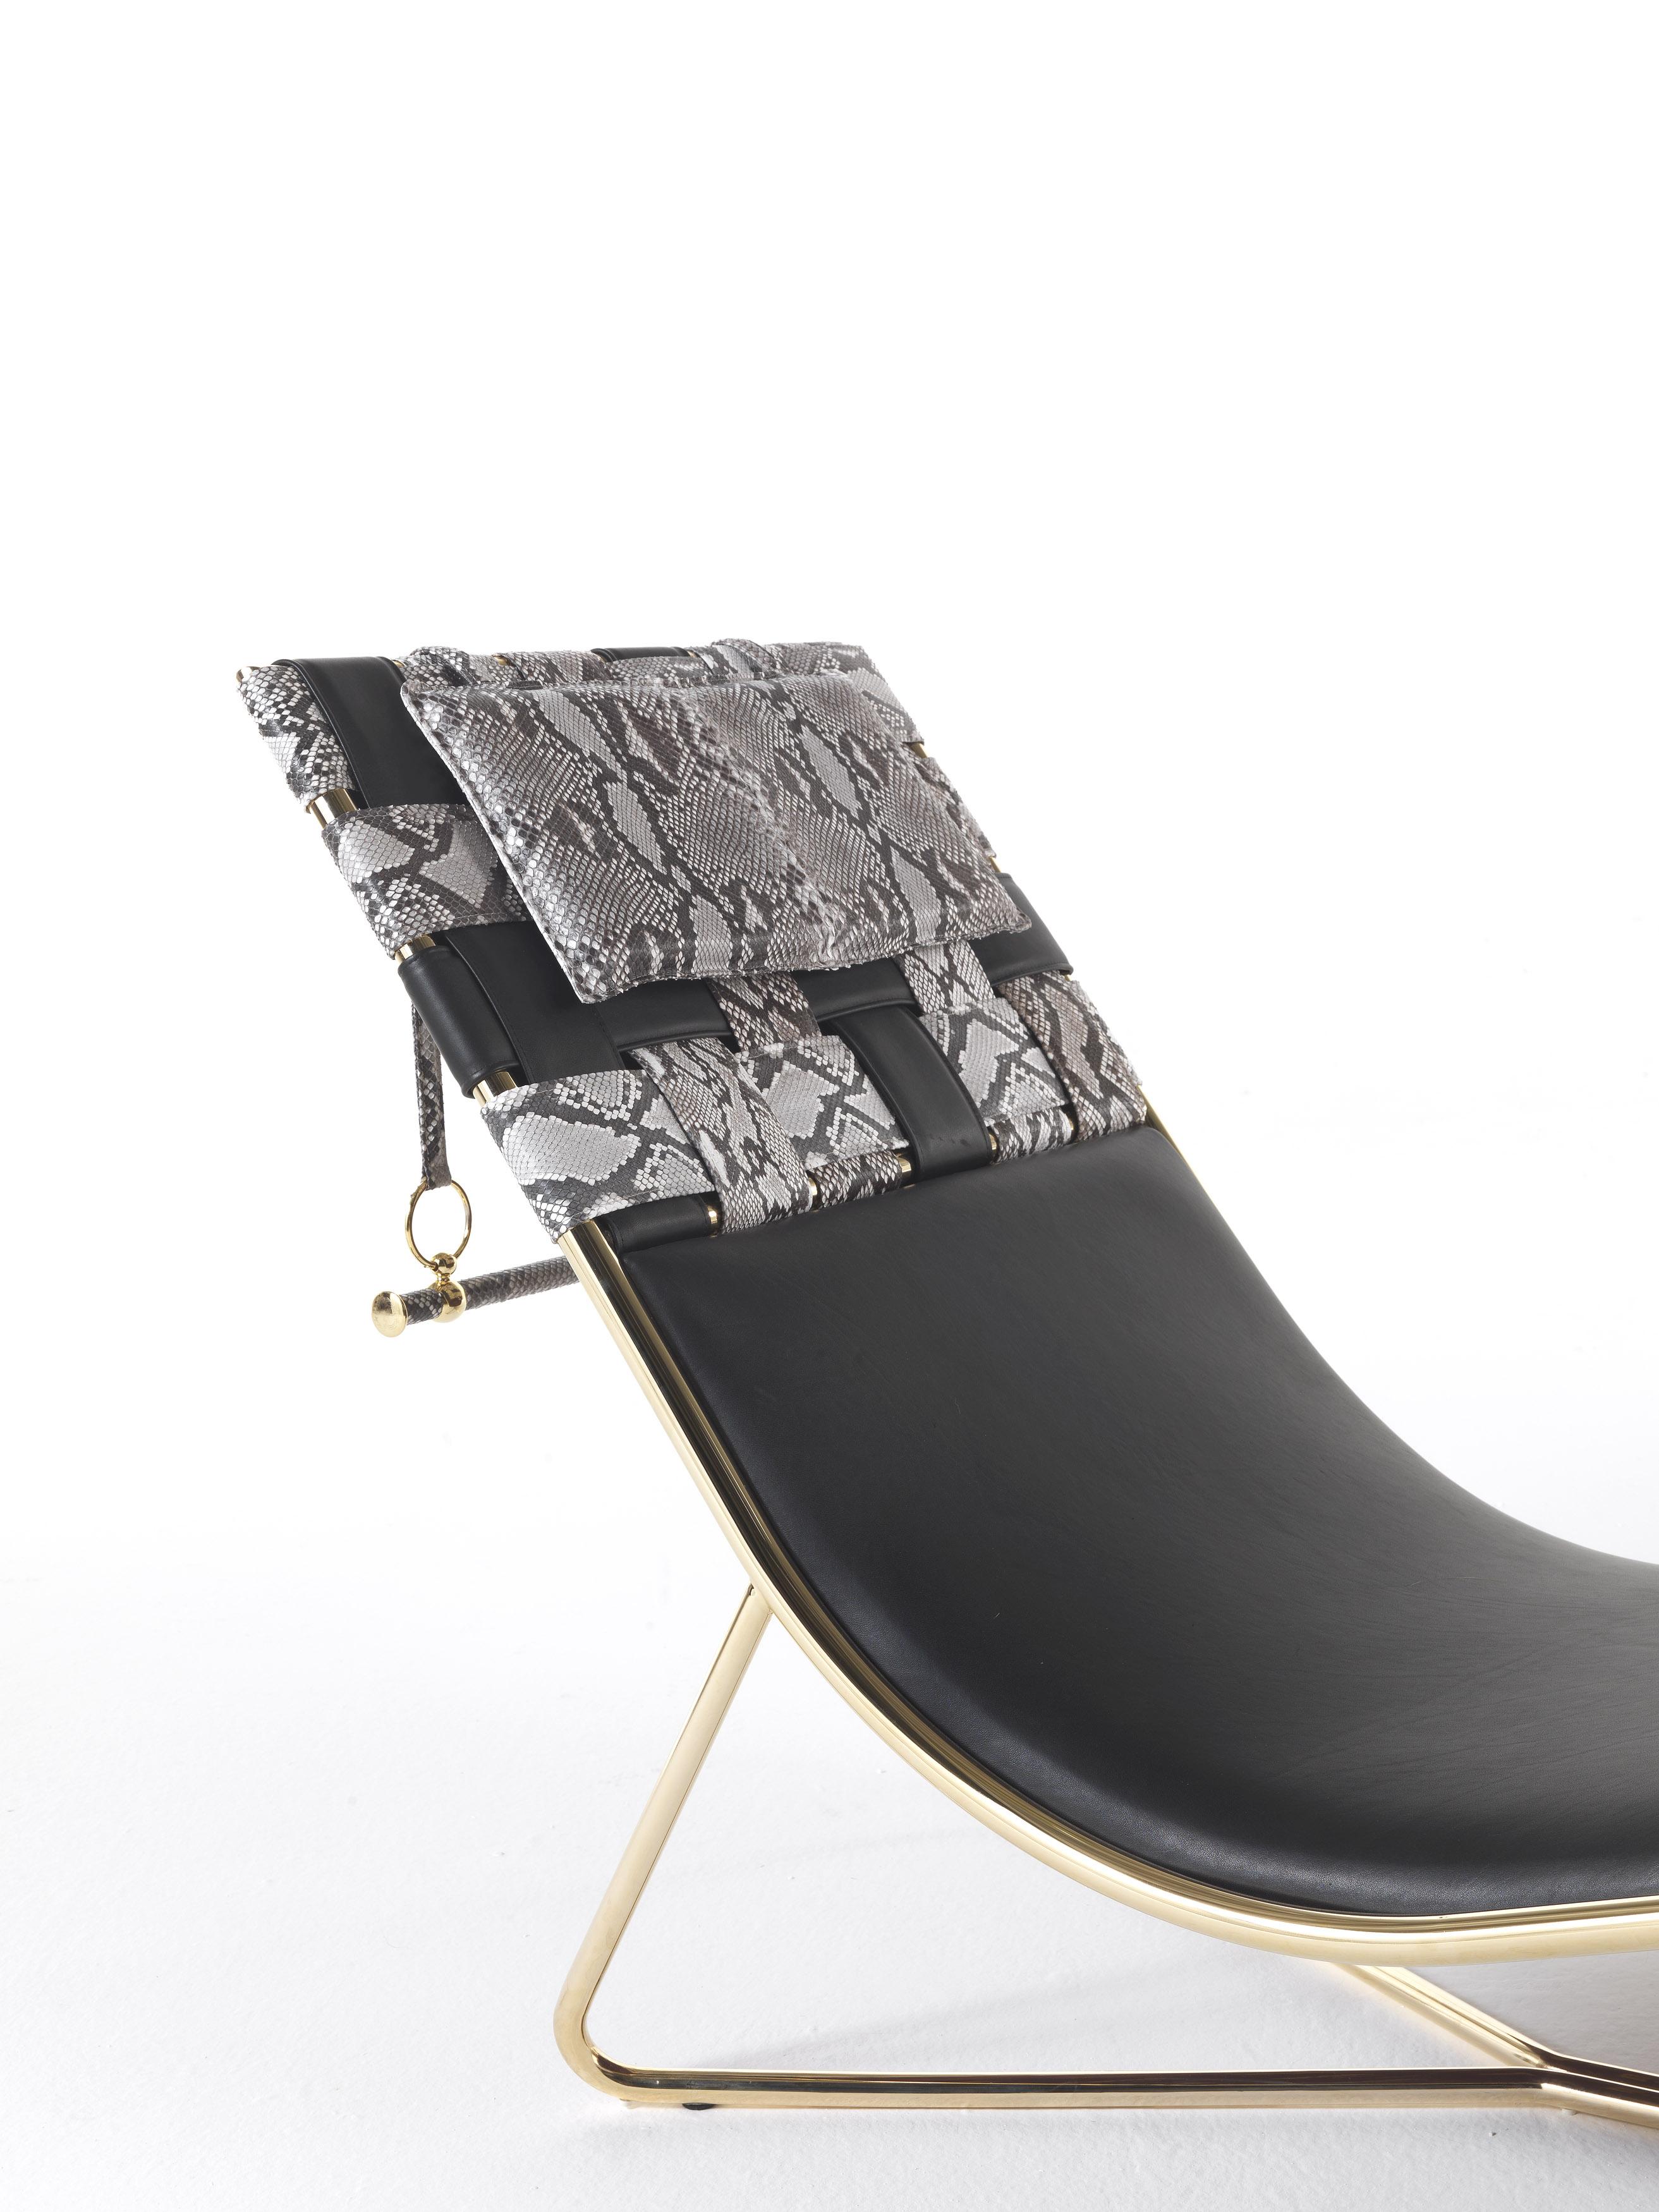 Modern 21st Century Papeete Chaise Lounge in Leather by Roberto Cavalli Home Interiors For Sale